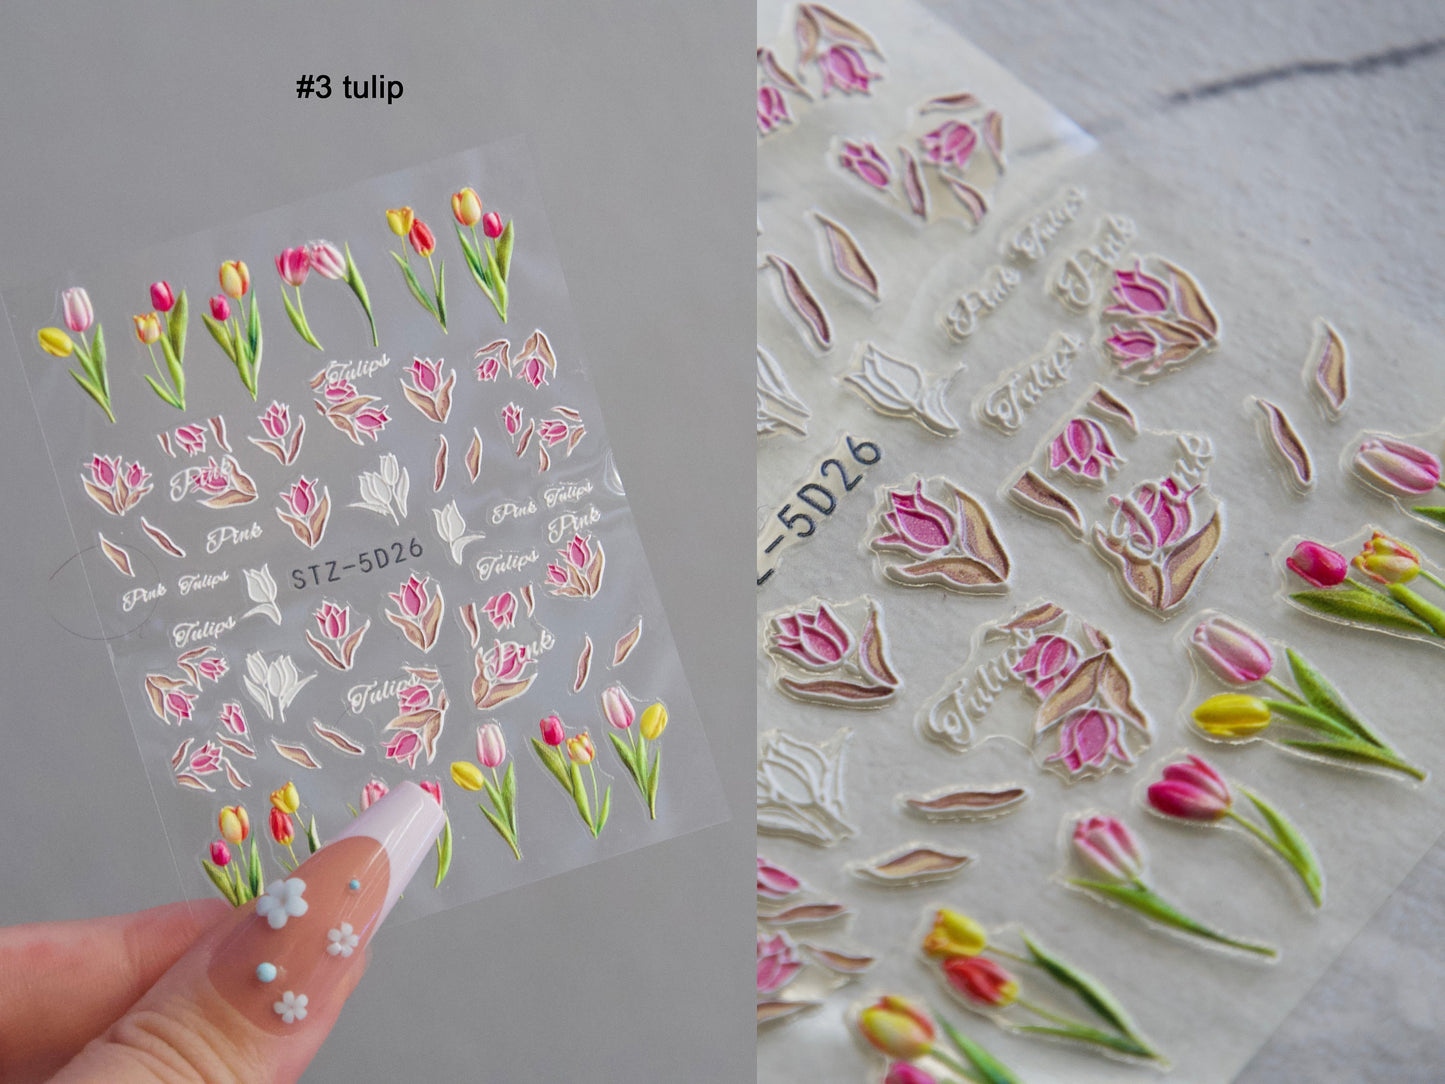 5D Flower Series Embossed nail sticker/Peel off 3D Floral Nail adhesive/ Rose Sakura Lace Lily Better no Hand painted Easy Nail art